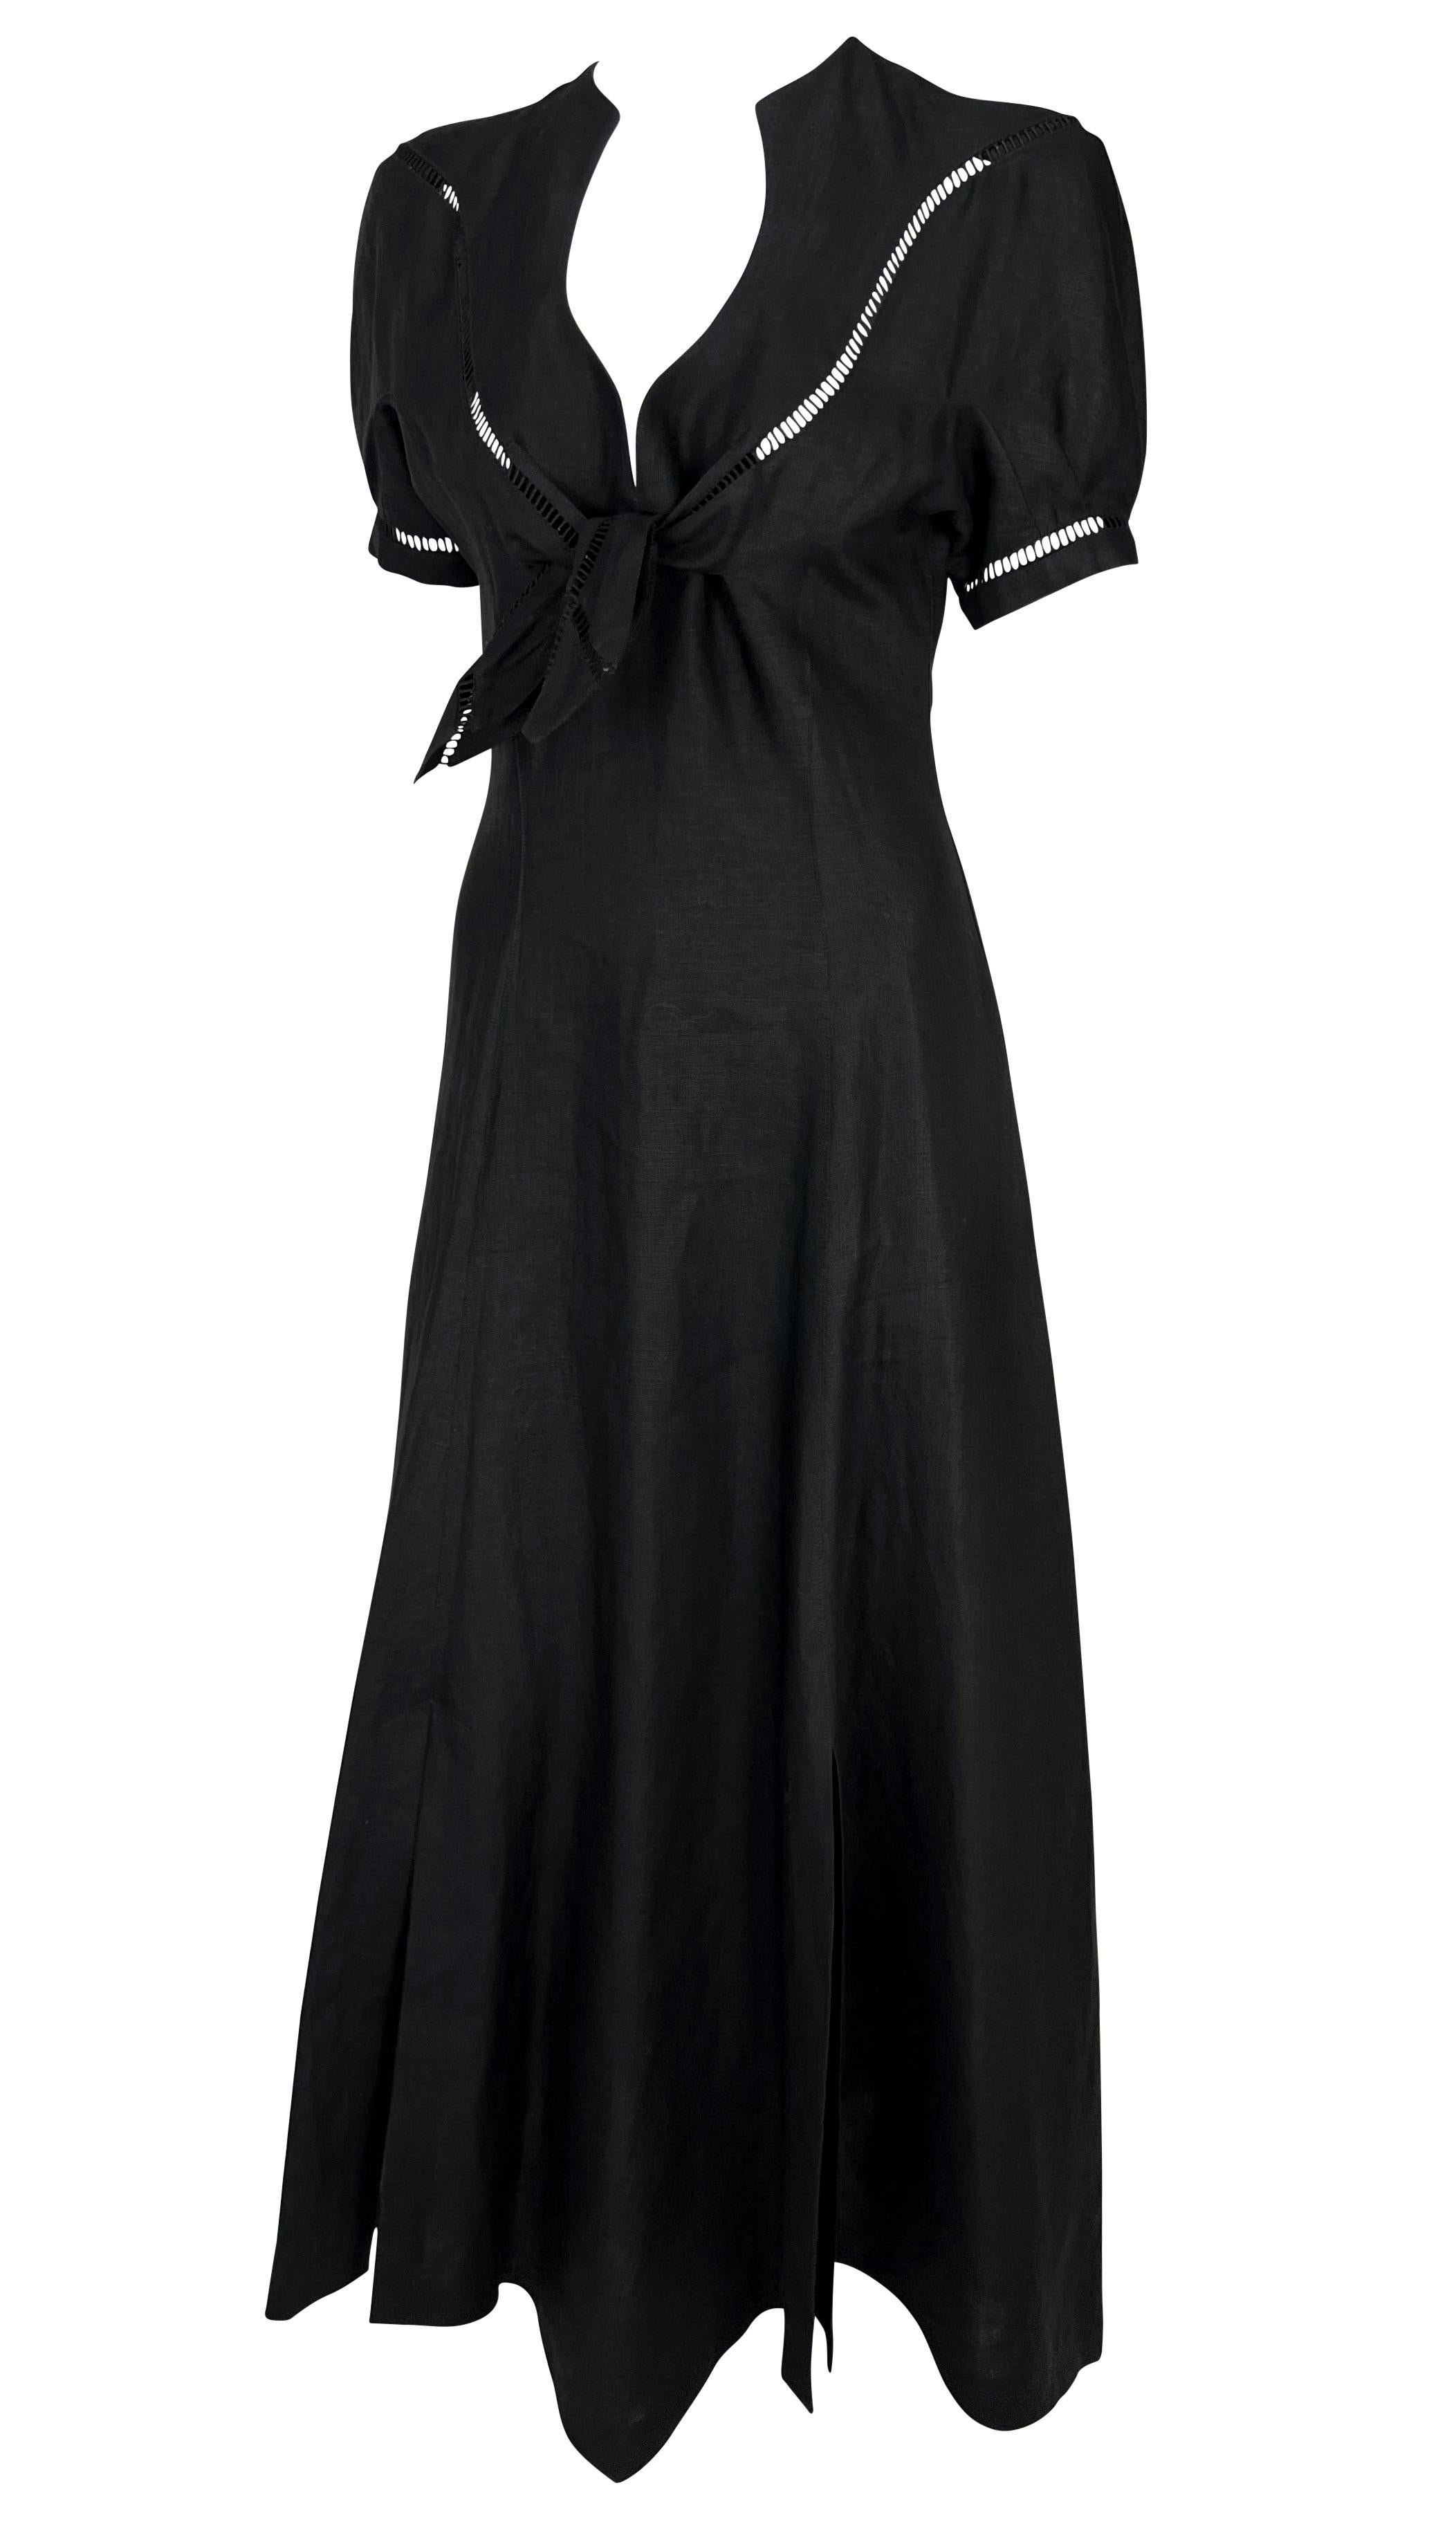 TheRealList presents: a fabulous black linen Thierry Mugler dress, designed by Manfred Mugler. From the Spring/Summer 1992 collection, similar tie-front dresses on the season's couture runway. This chic dress is constructed entirely of black linen